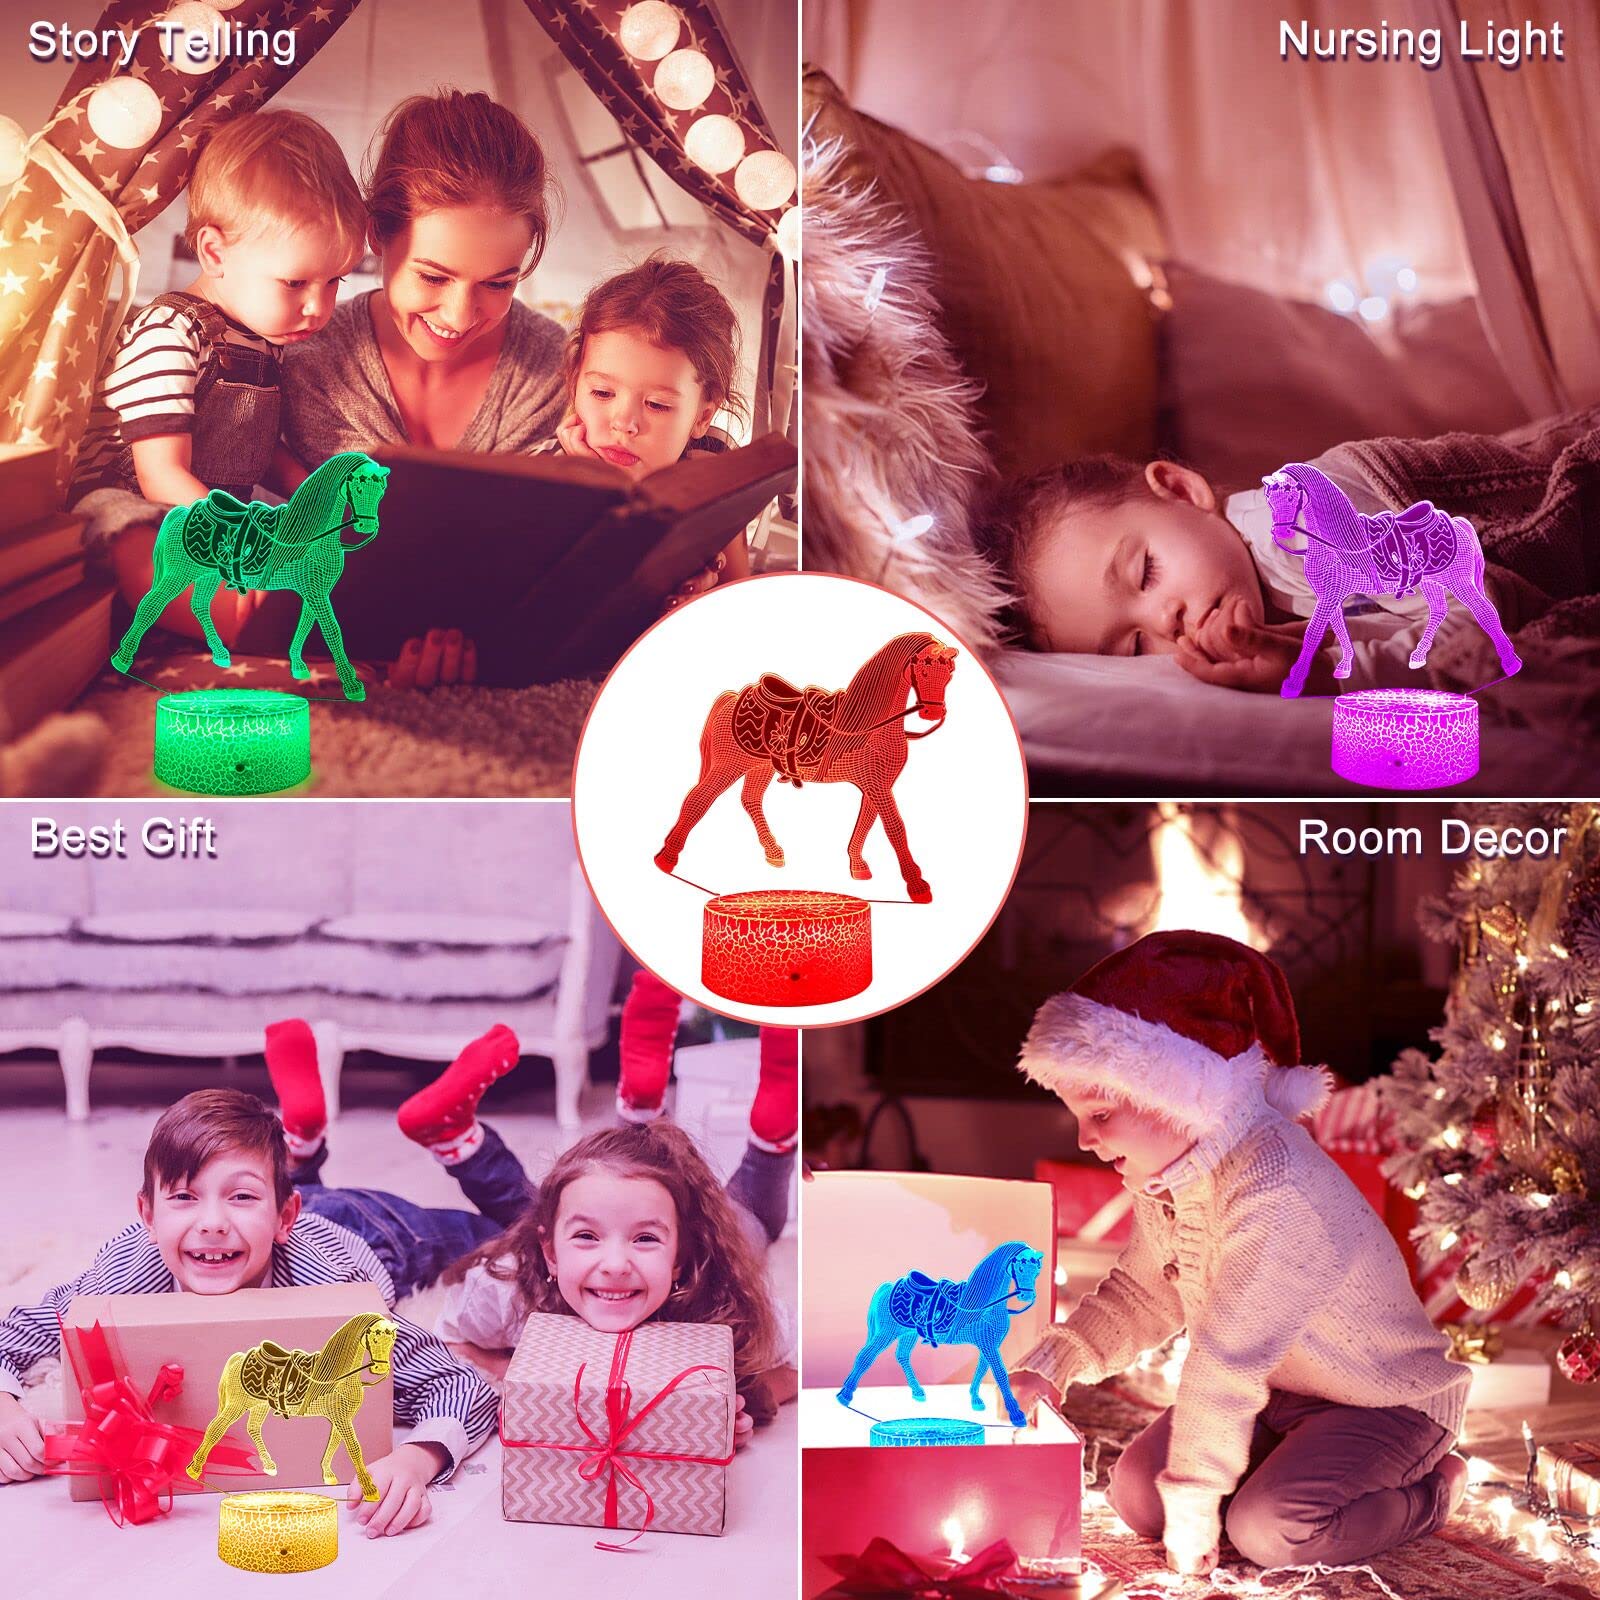 Horse Gifts Night Lights for Kids with Remote & Smart Touch Horse Lamp for Kids Room Decor 16 Colors Changing Dimmable Horse Toys 1 2 3 4 5 6 7 8 Year Old Boy Girl Gifts(Horse)